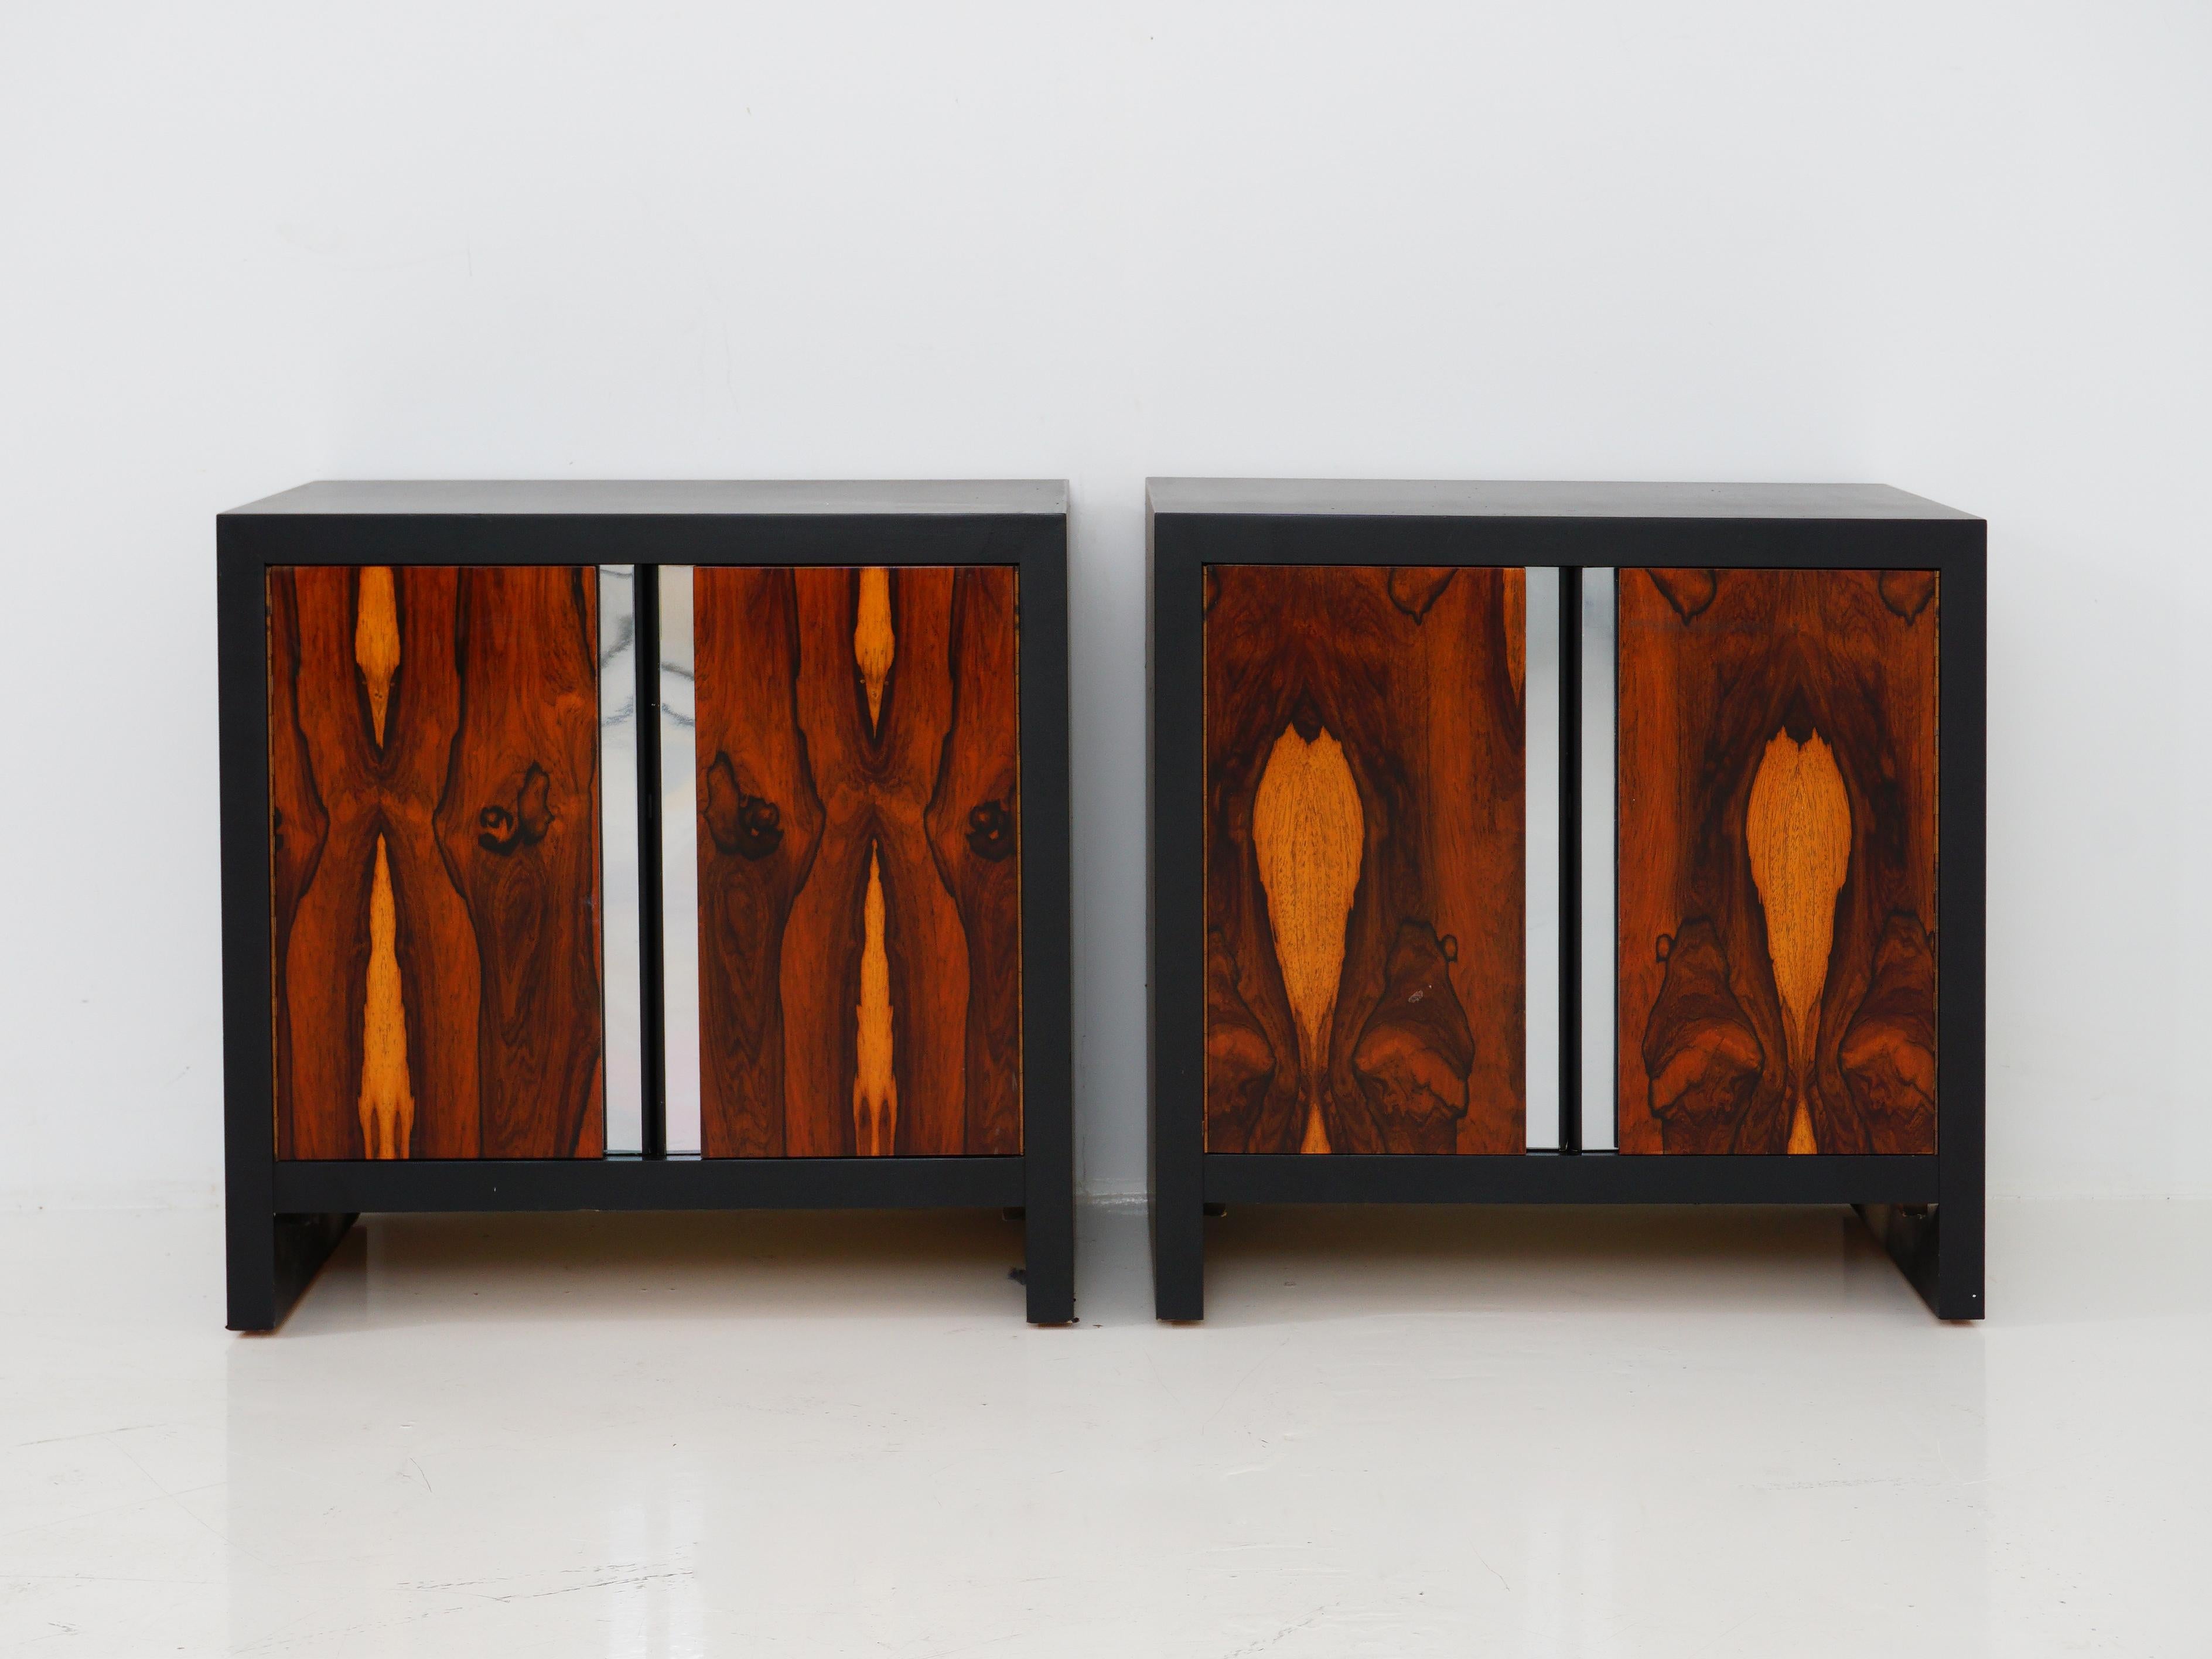 Elevate your bedroom's ambiance with this stunning pair of Mid-Century Modern rosewood nightstands. The clean lines and minimalist design make them the perfect blend of form and function, adding a dose of vintage charm to your sleeping sanctuary.

-